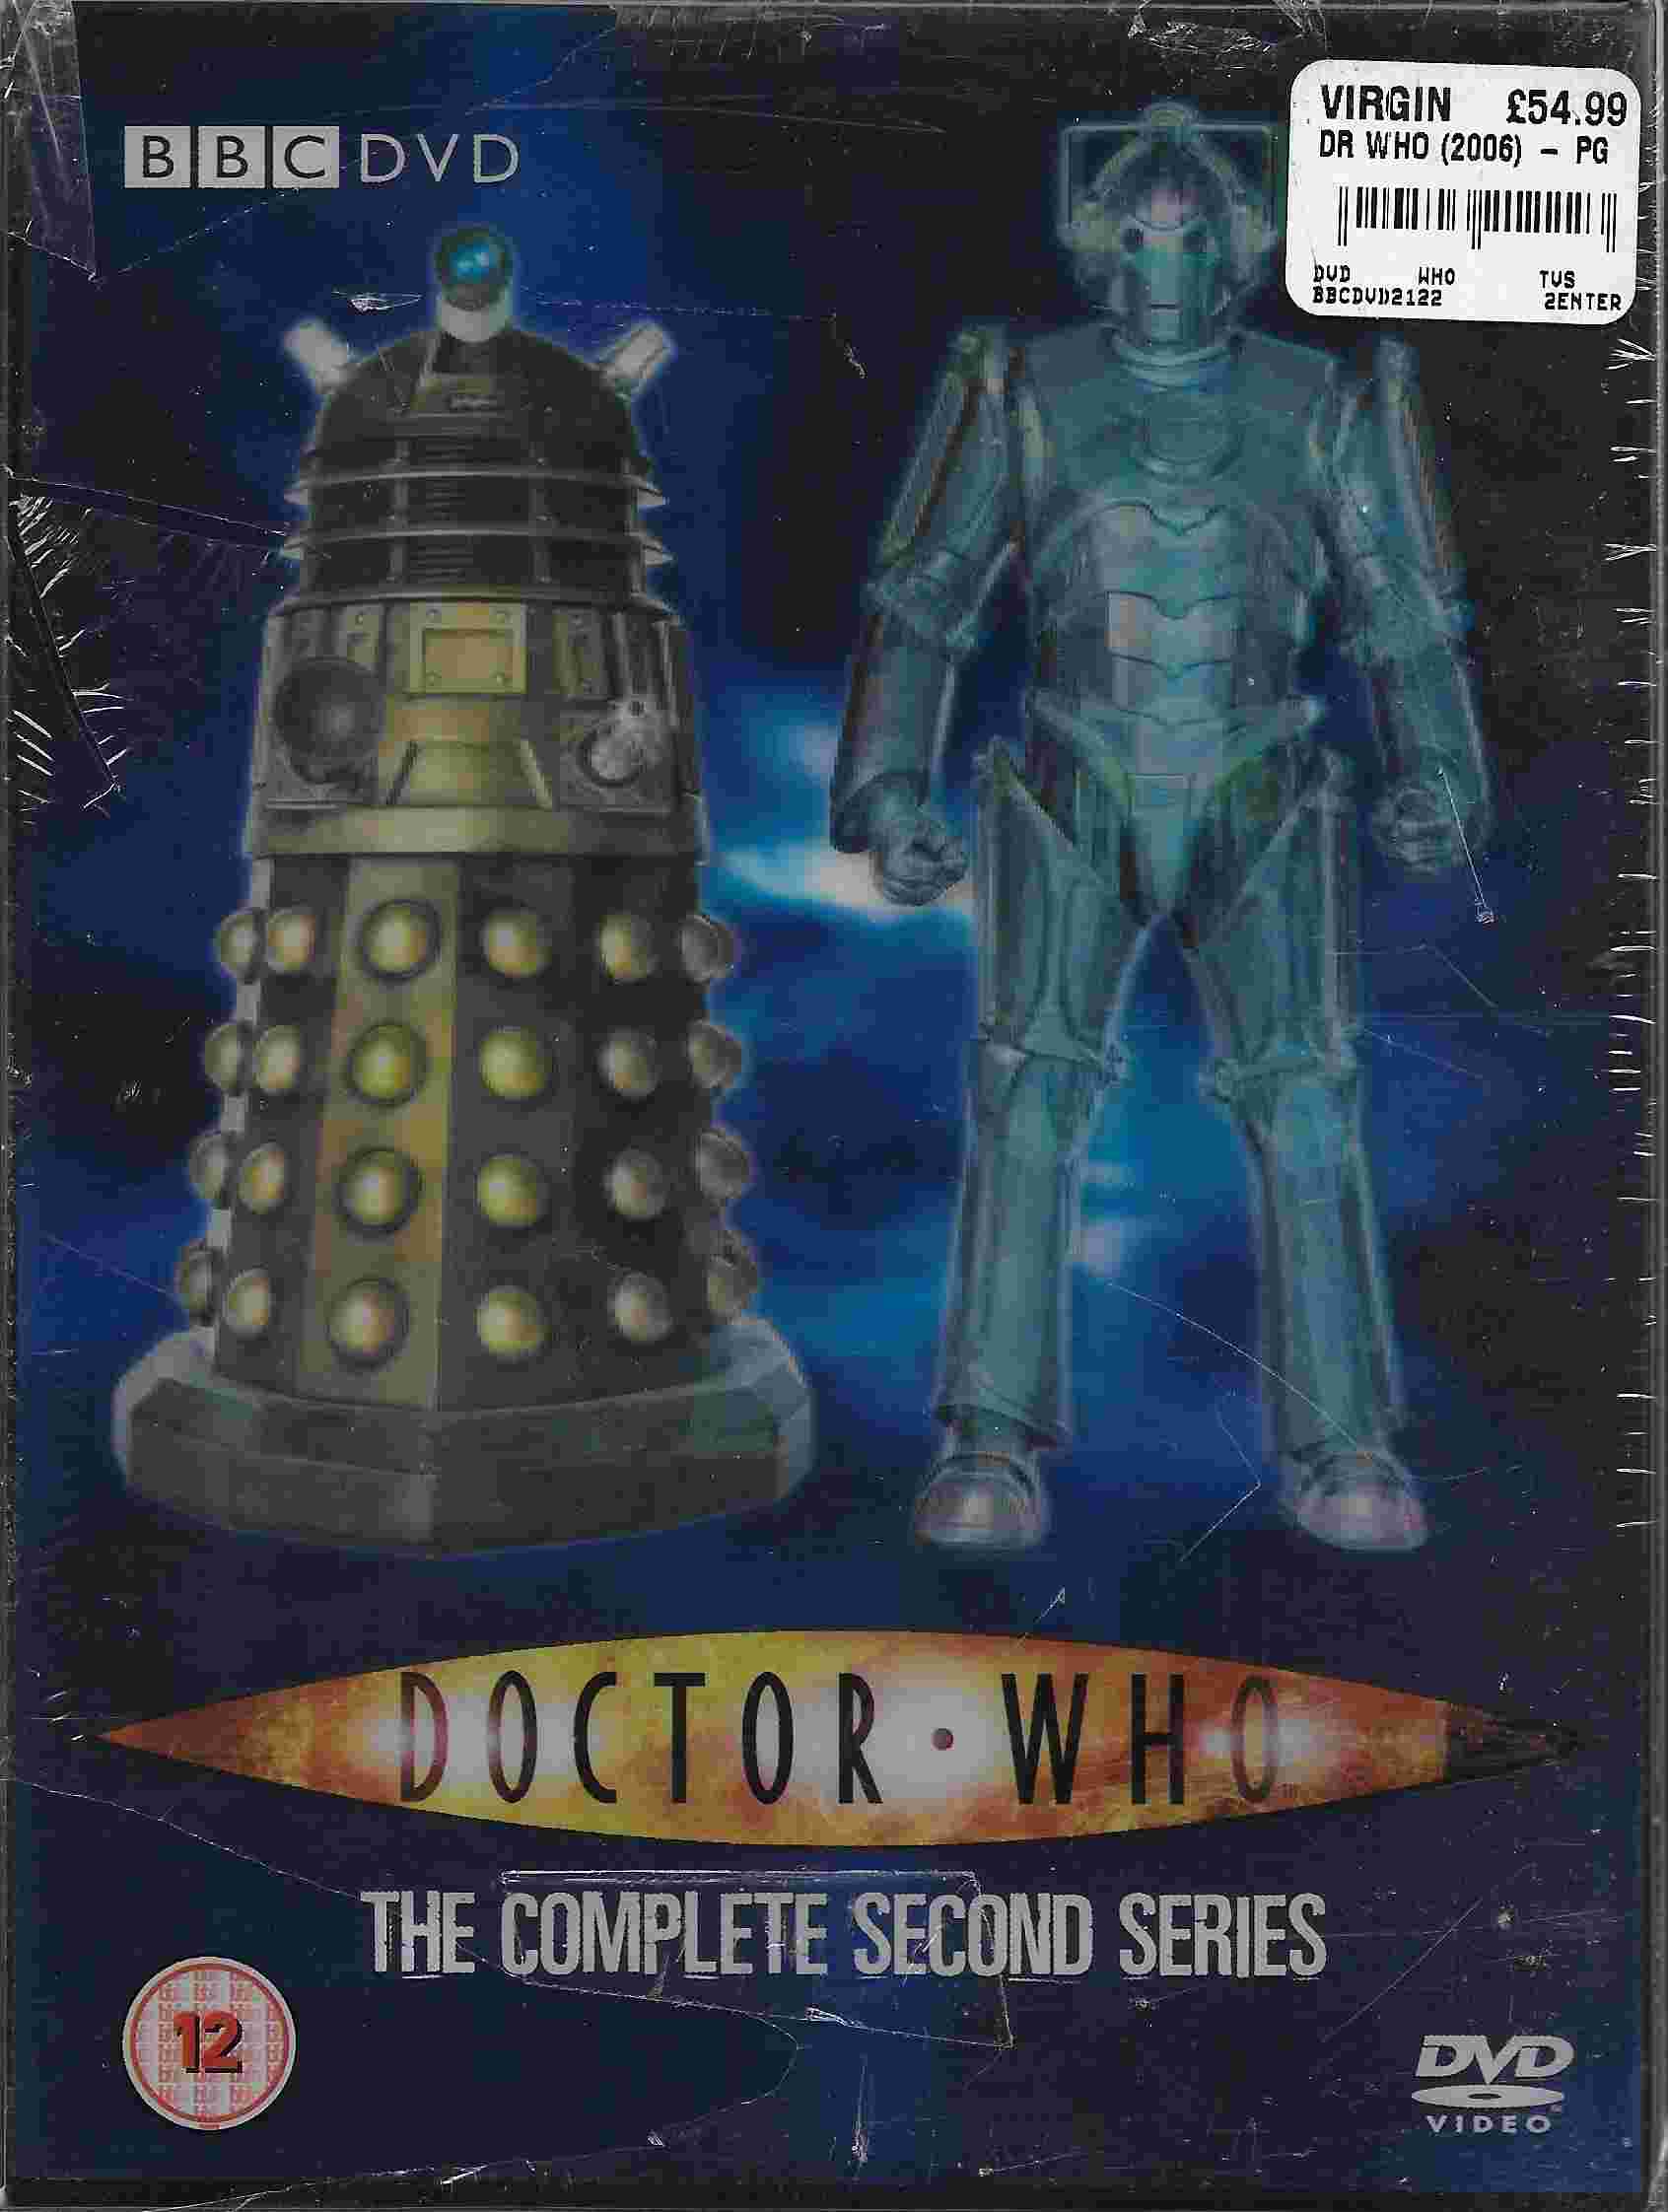 Picture of BBCDVD 2122 Doctor Who - Series 2 by artist Various from the BBC records and Tapes library